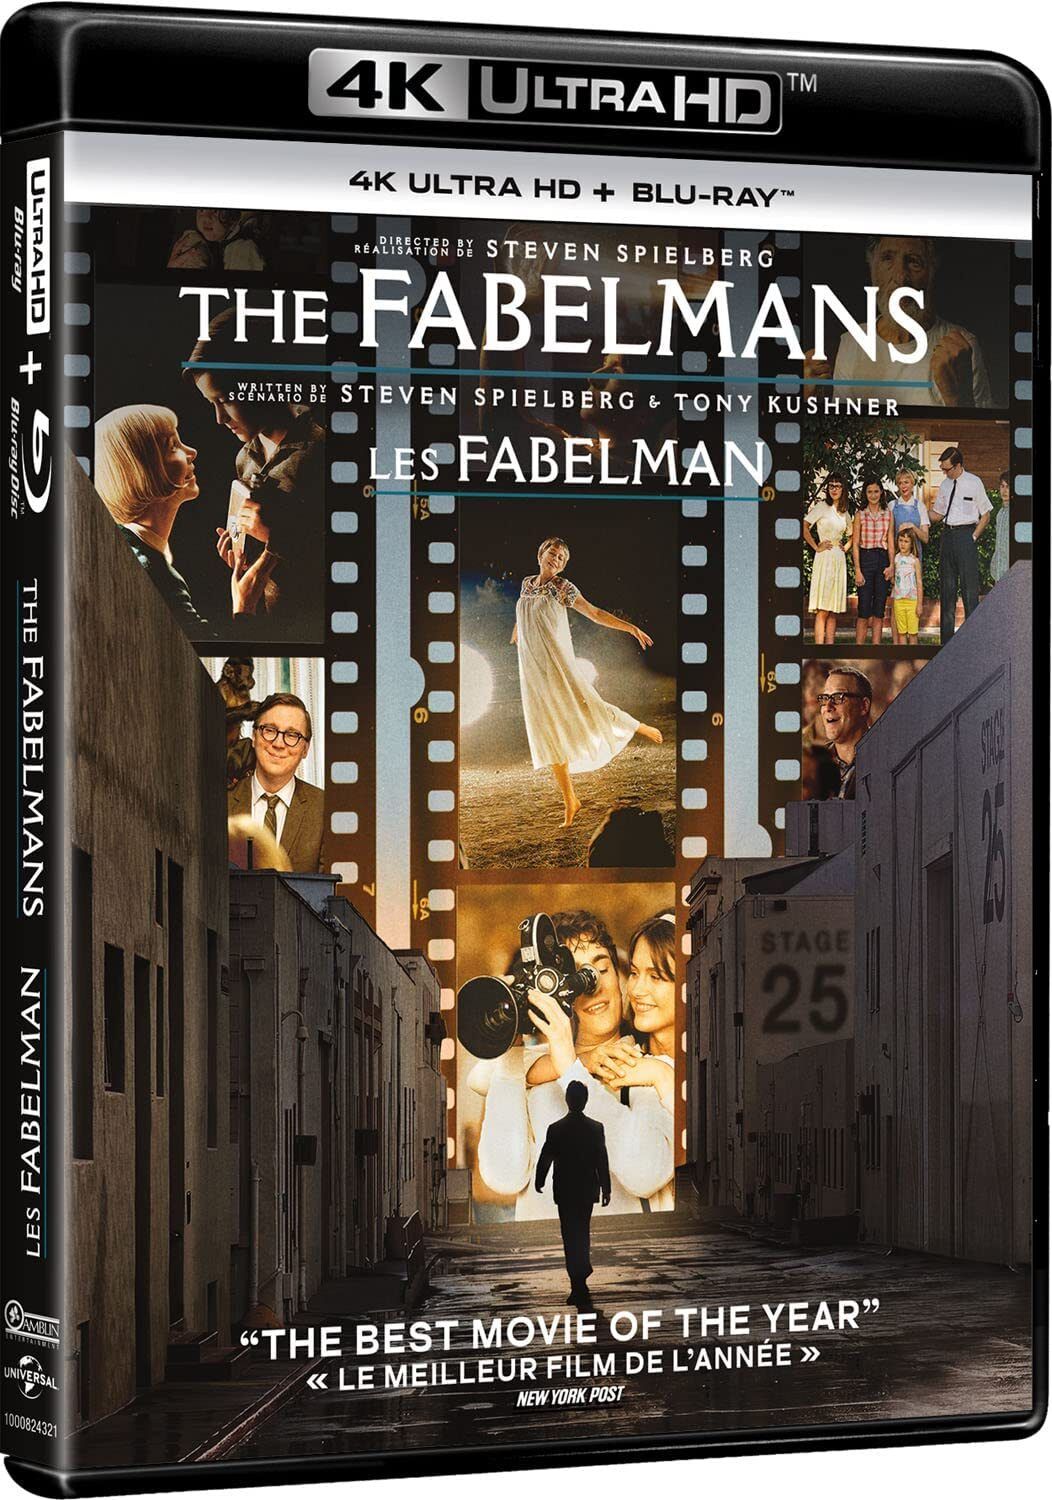 The jacket art for Universal's 4K edition of THE FABELMANS.